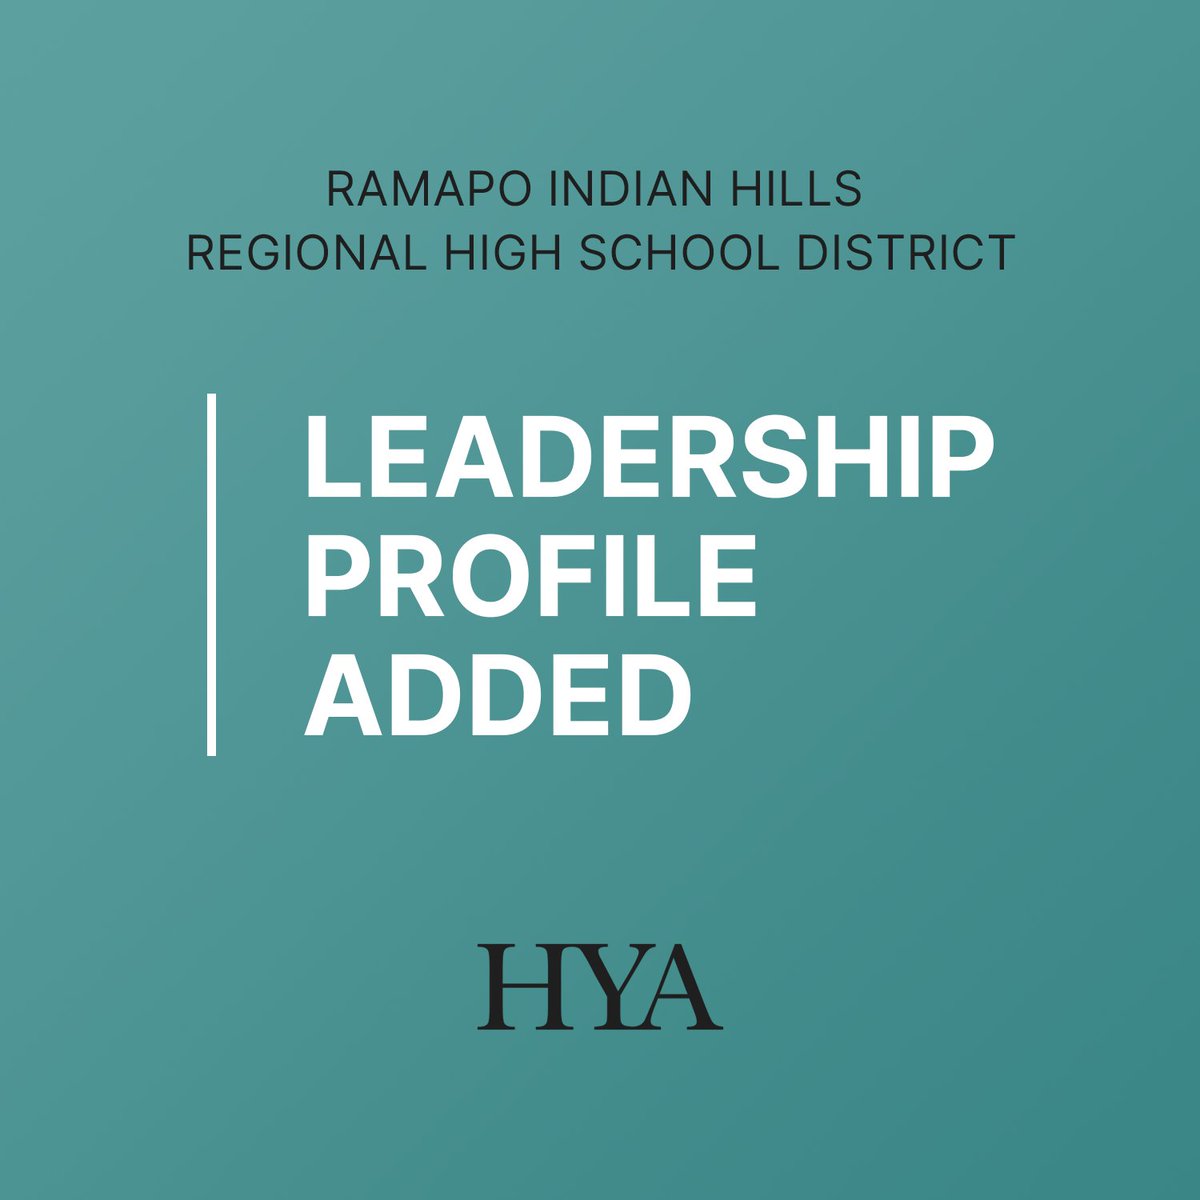 #Superintendent Ramapo Indian Hills Regional High School District, NJ | Read the Leadership Profile Report bit.ly/48oUaP4

#HYAsearch #Education #Jobs #EducationJobs #suptchat #edleadership #edadmin #community